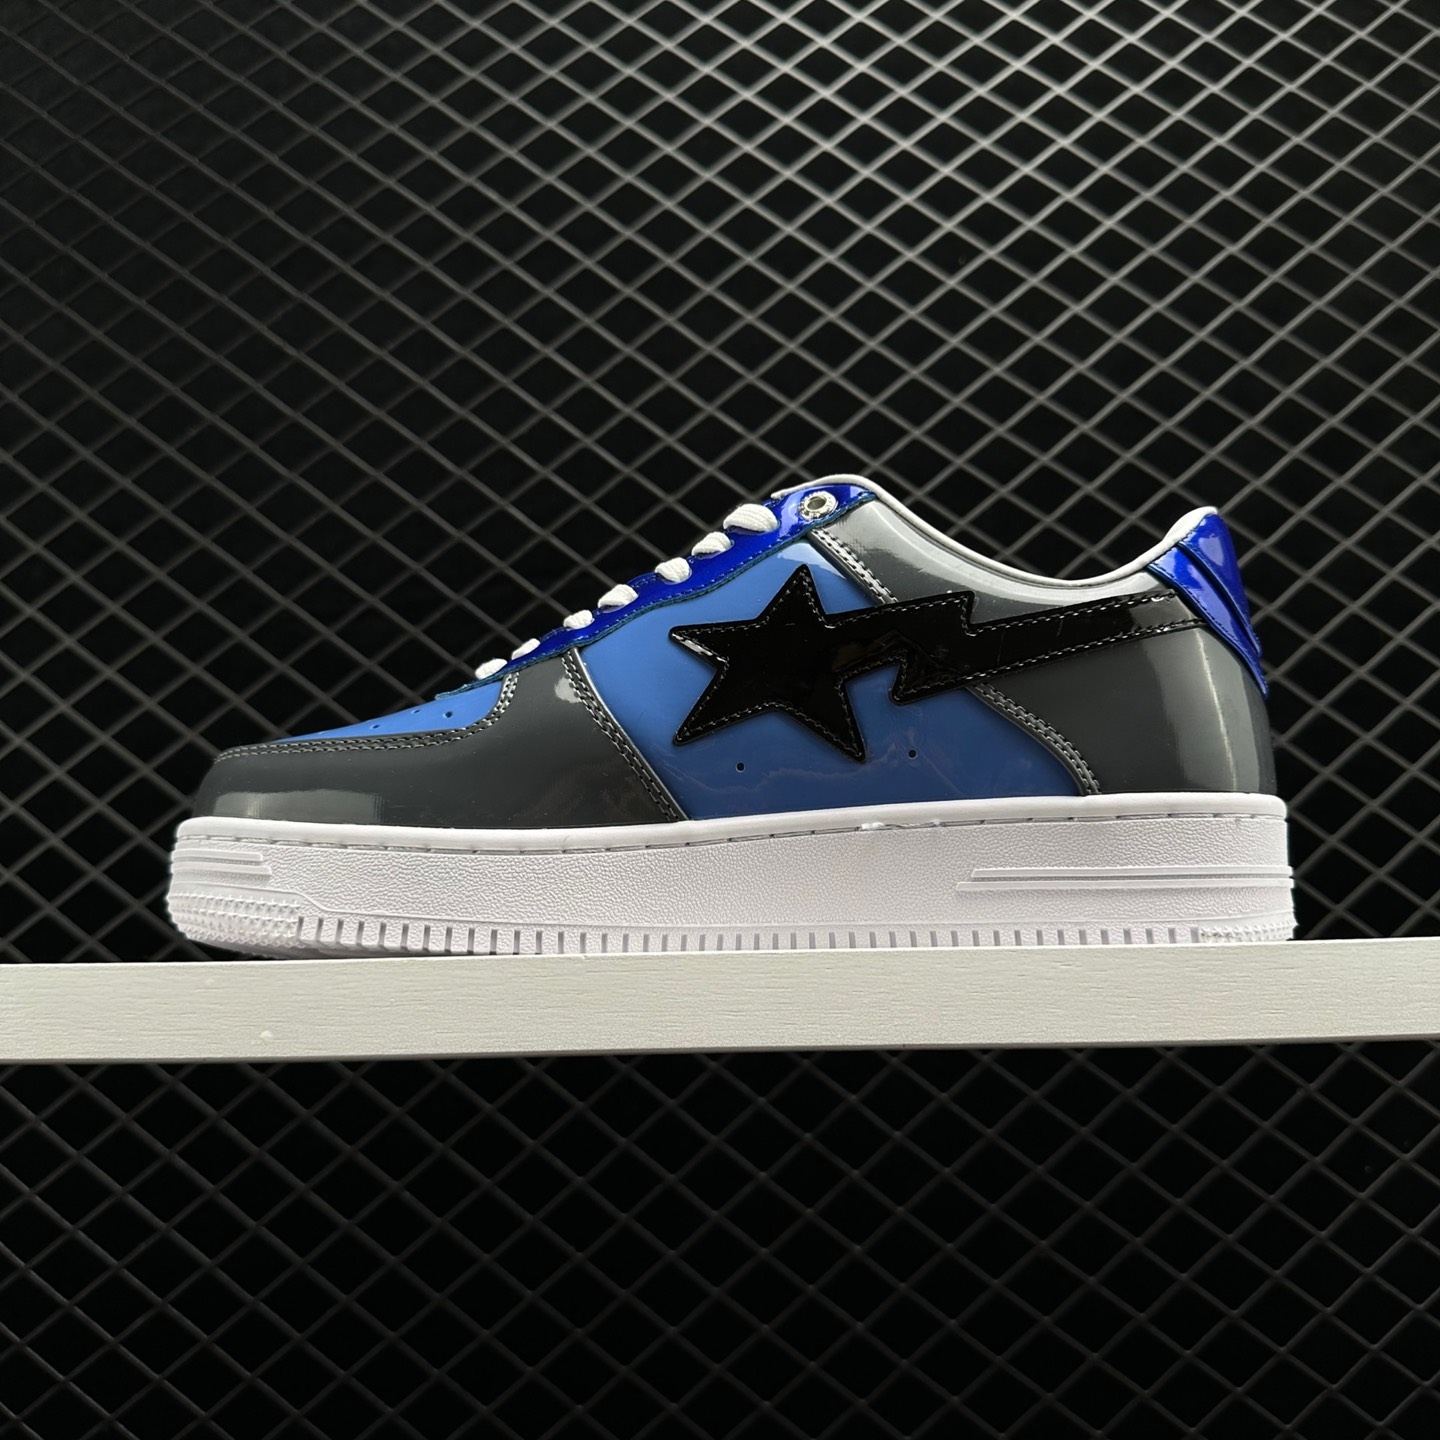 A Bathing Ape Bape Sta Low Navy Color Combo - Trendy Sneakers for Style Enthusiasts!